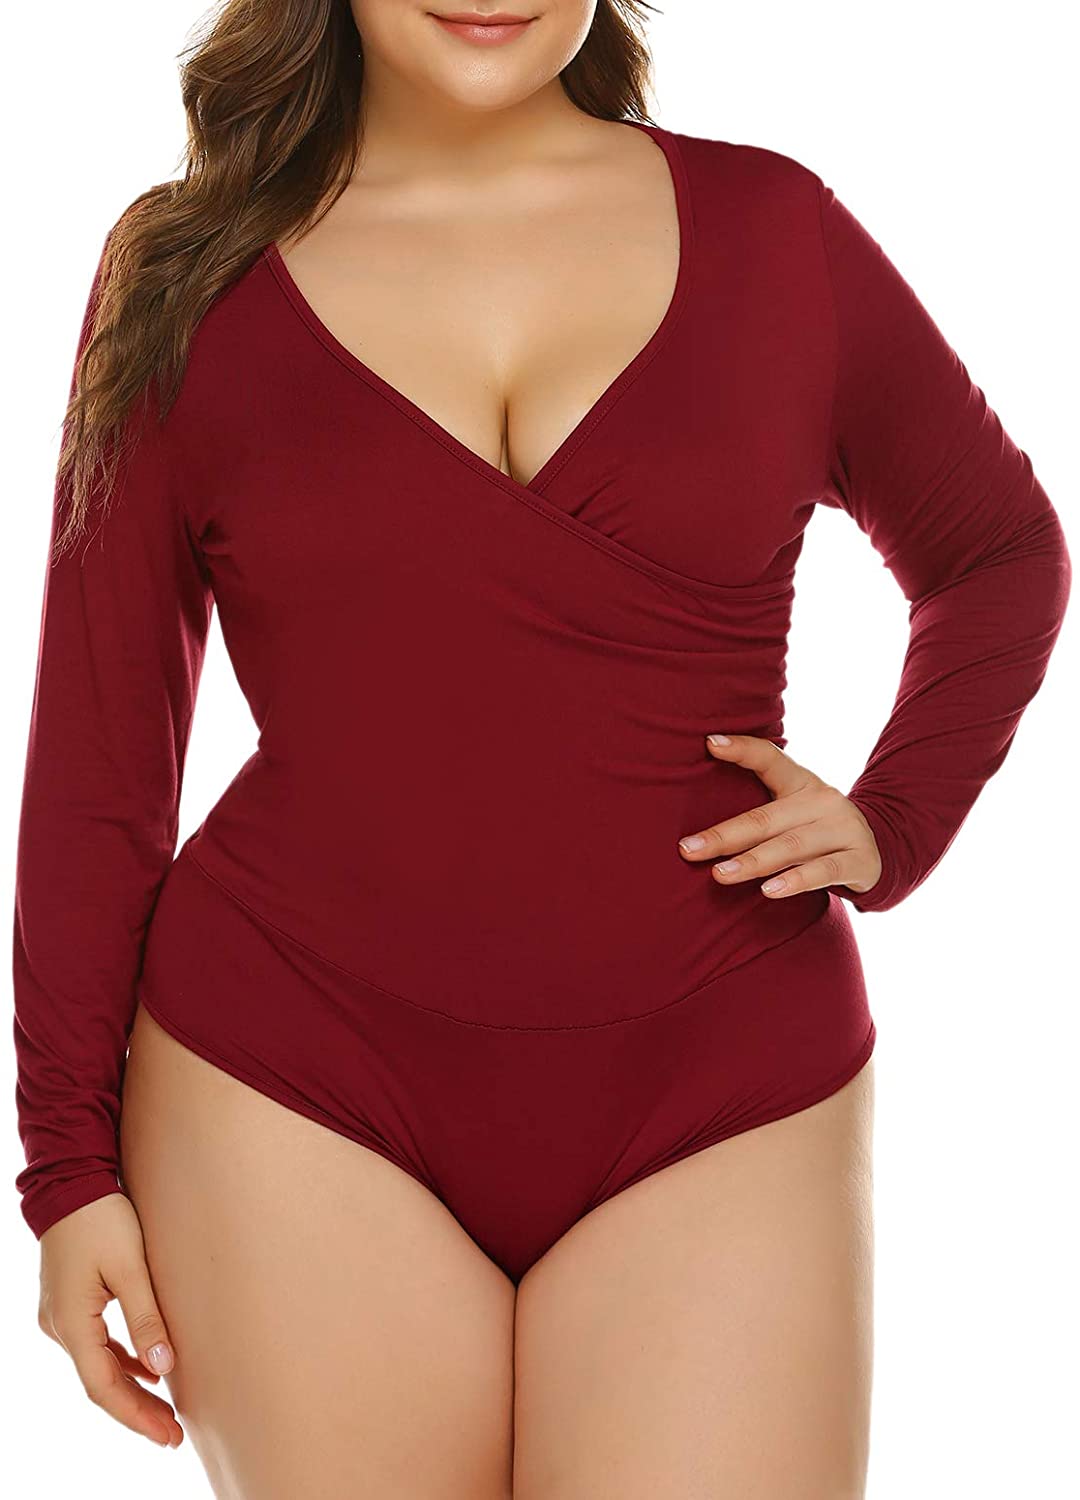  IN'VOLAND Women's Plus Size Long Sleeve Bodysuit For